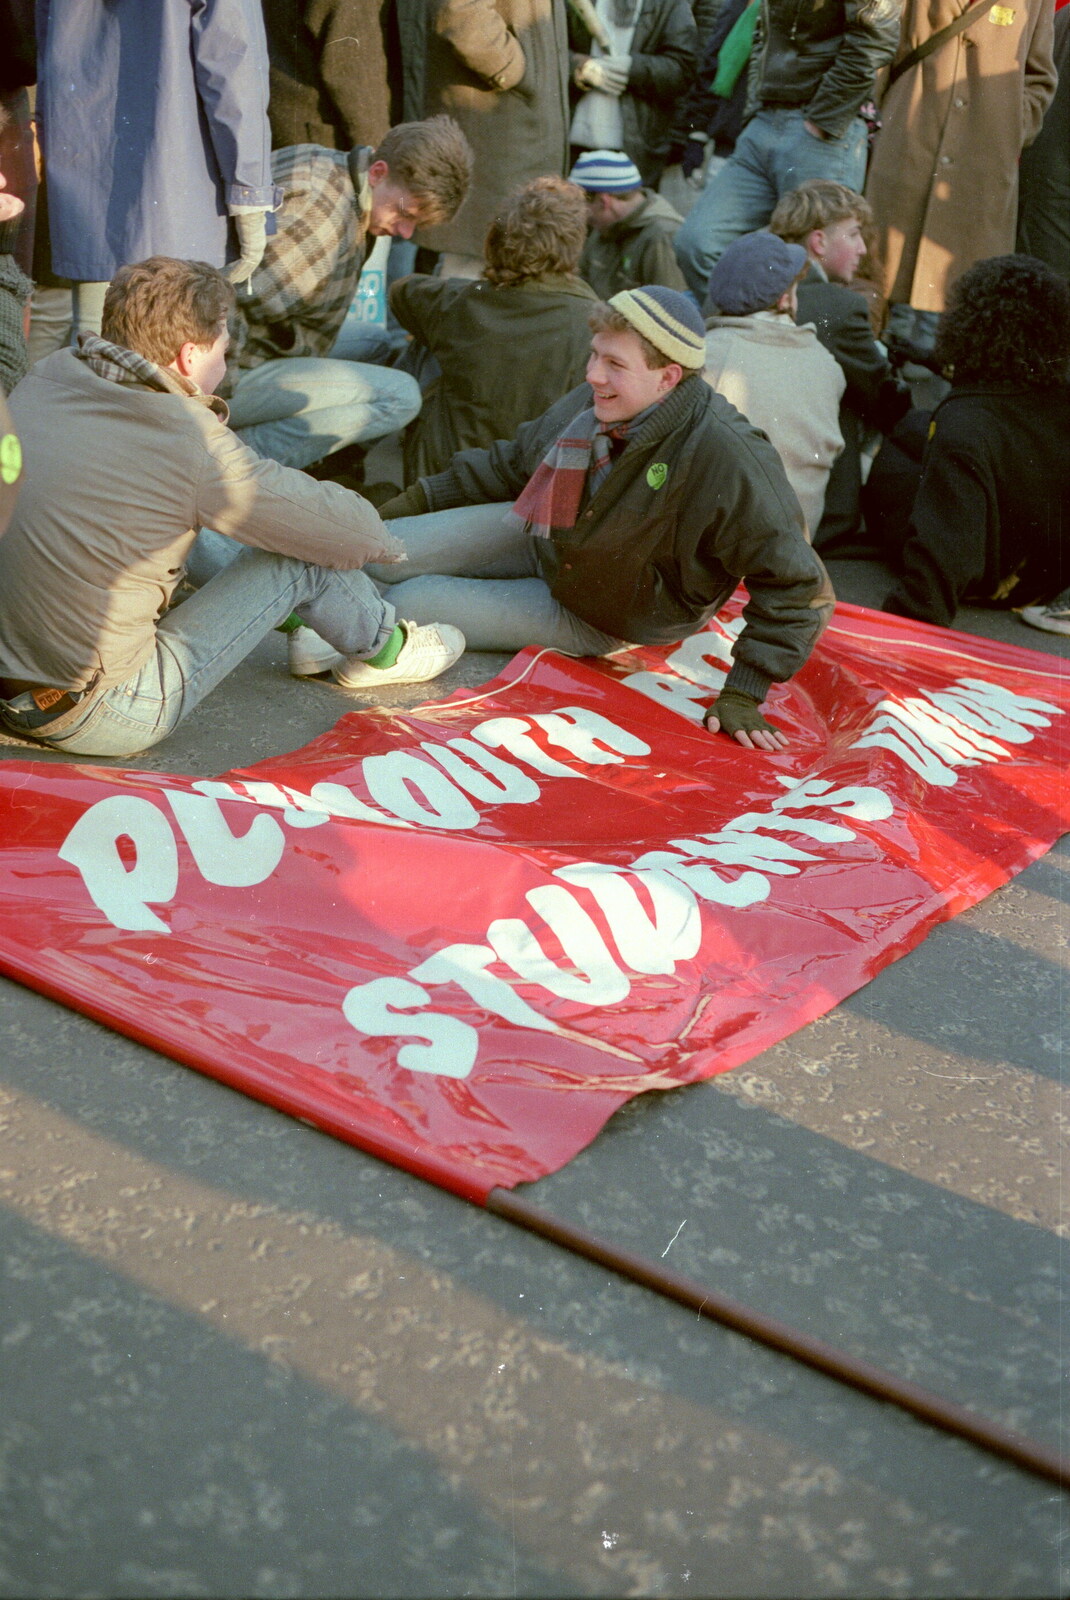 A sit-in on the Plymouth Poly Students' Union banner from Uni: No Chance Fowler! A student Demonstration, London - 26th February 1986